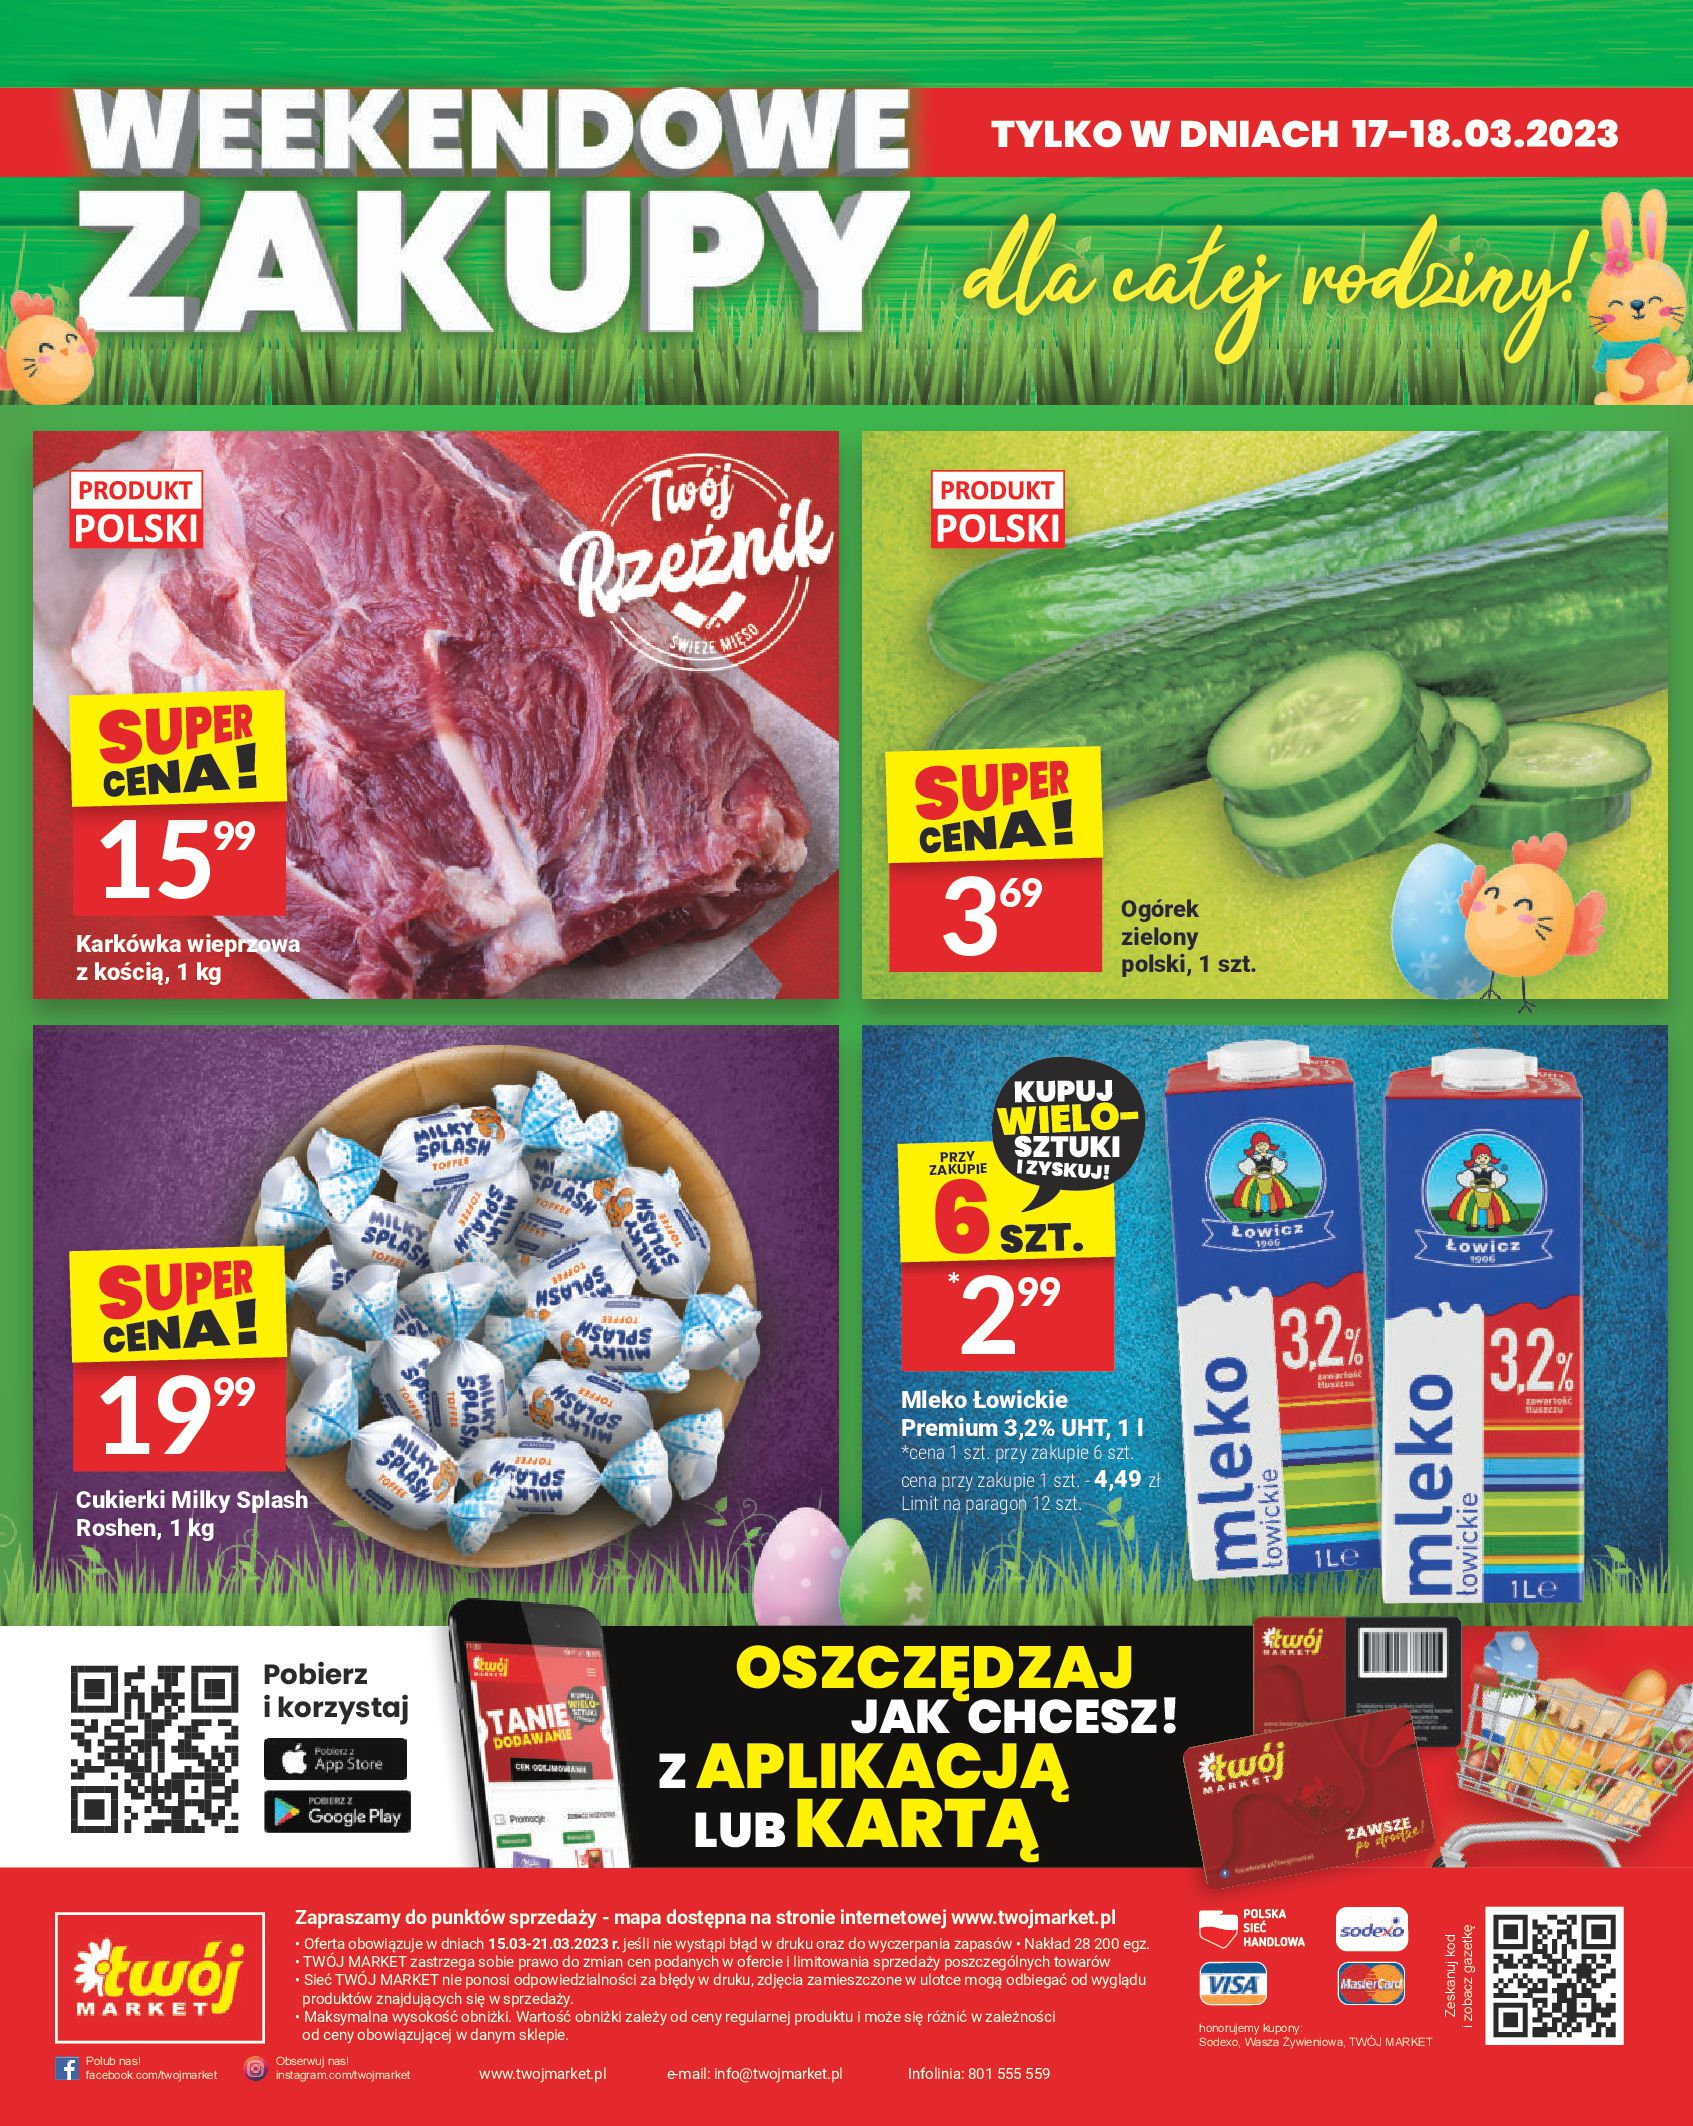 Gazetka TwójMarket.pl: Gazetka TwójMarket.pl do 21.03. 2023-03-15 page-32